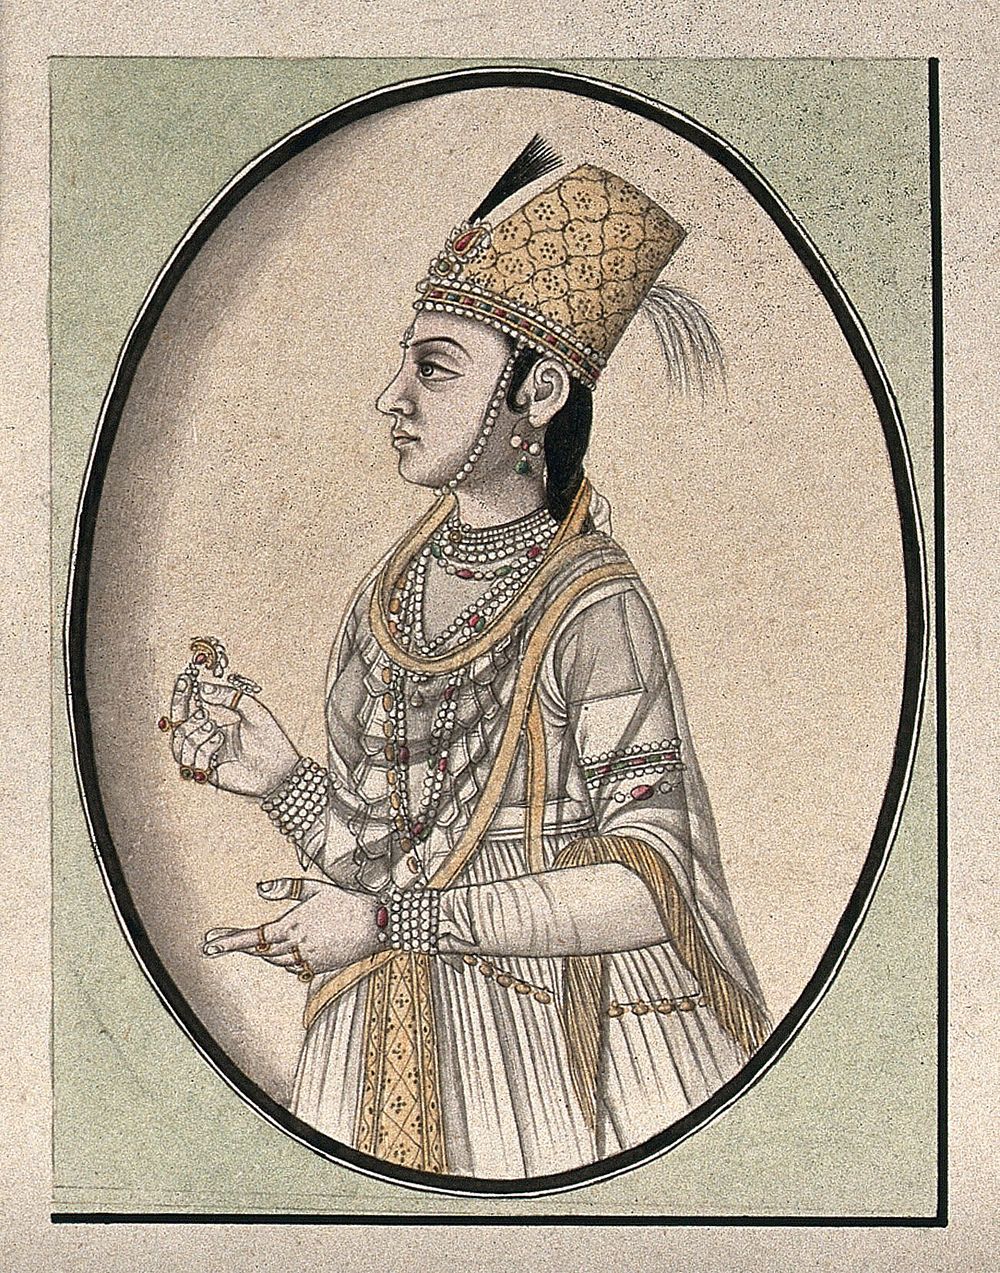 The empress of Mohammad Shah. Watercolour drawing by an Indian artist.